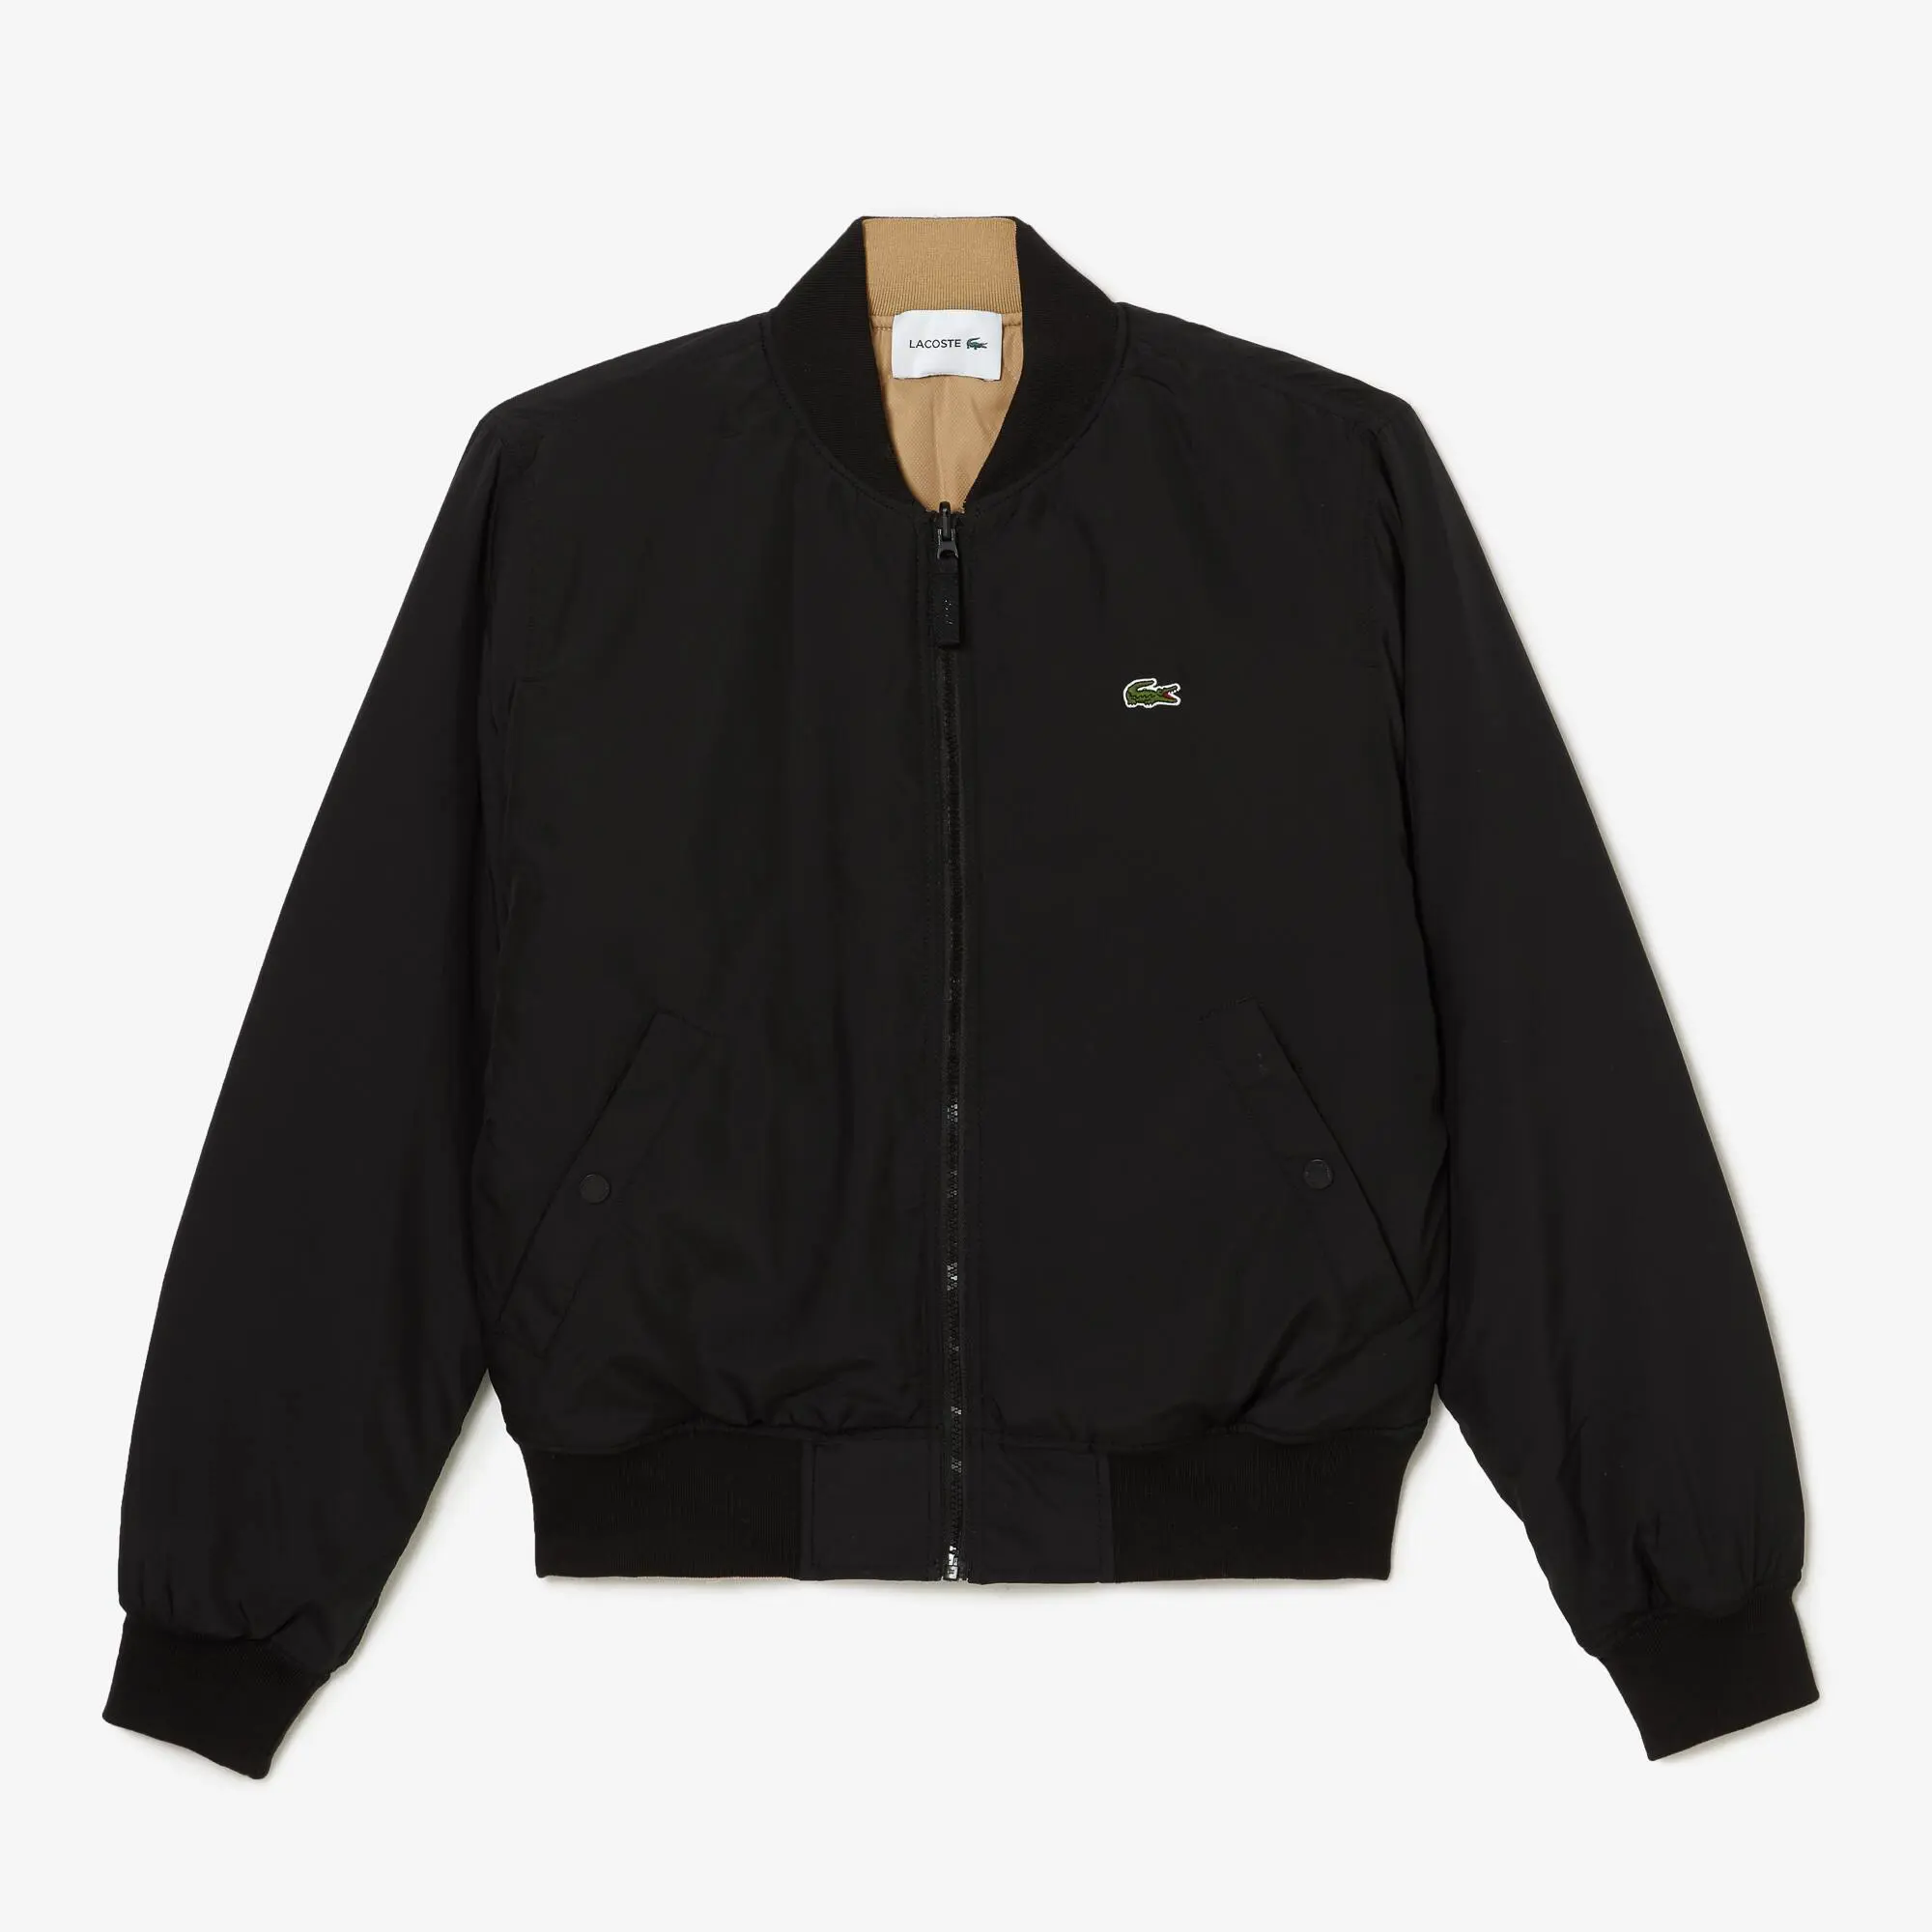 Lacoste Men's Lacoste Reversible Quilted Taffeta Bomber Jacket. 2